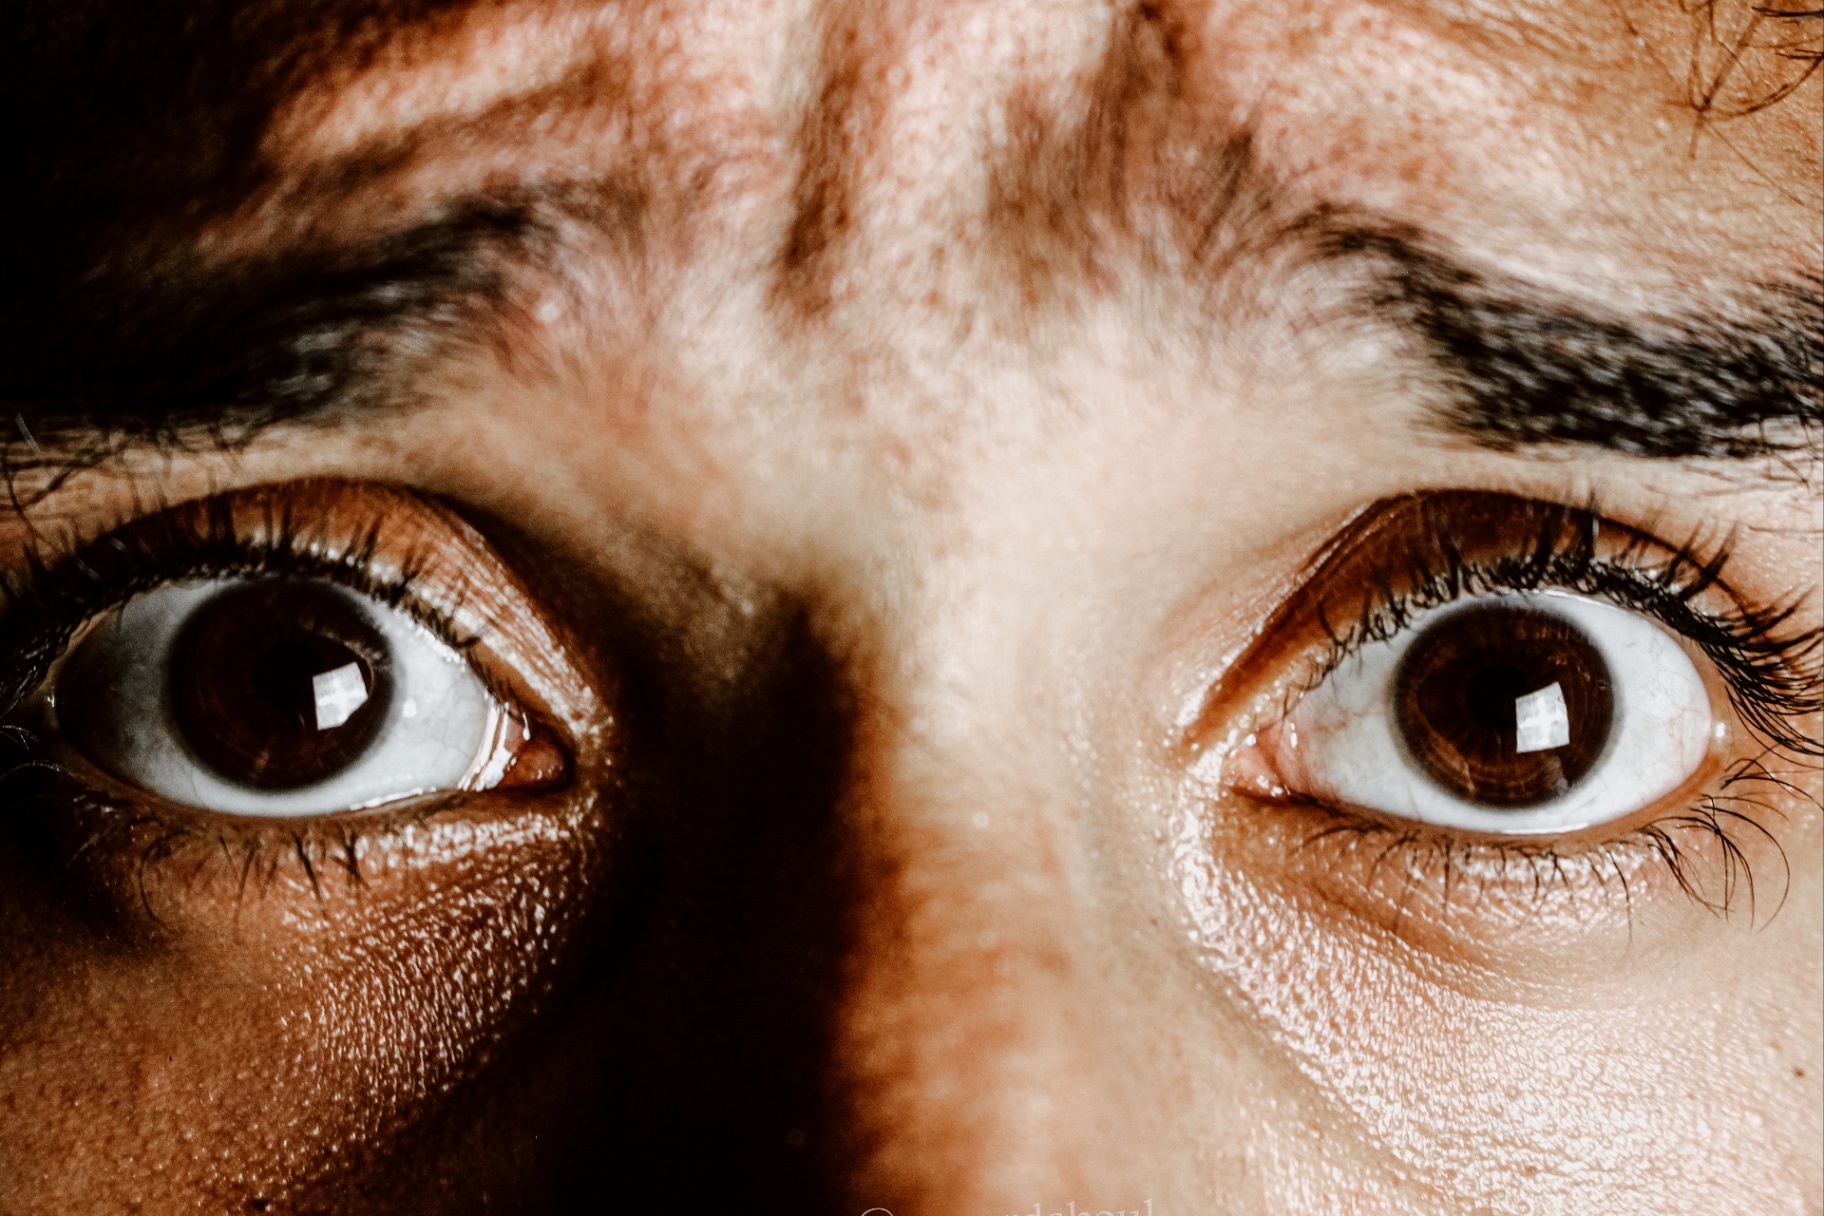 A close-up of a person’s eyes shows a stressed expression. This could symbolize the stress an EMDR therapist in Palm Beach, FL can help address. Learn more about EMDR in Palm Beach, FL and other services today. 